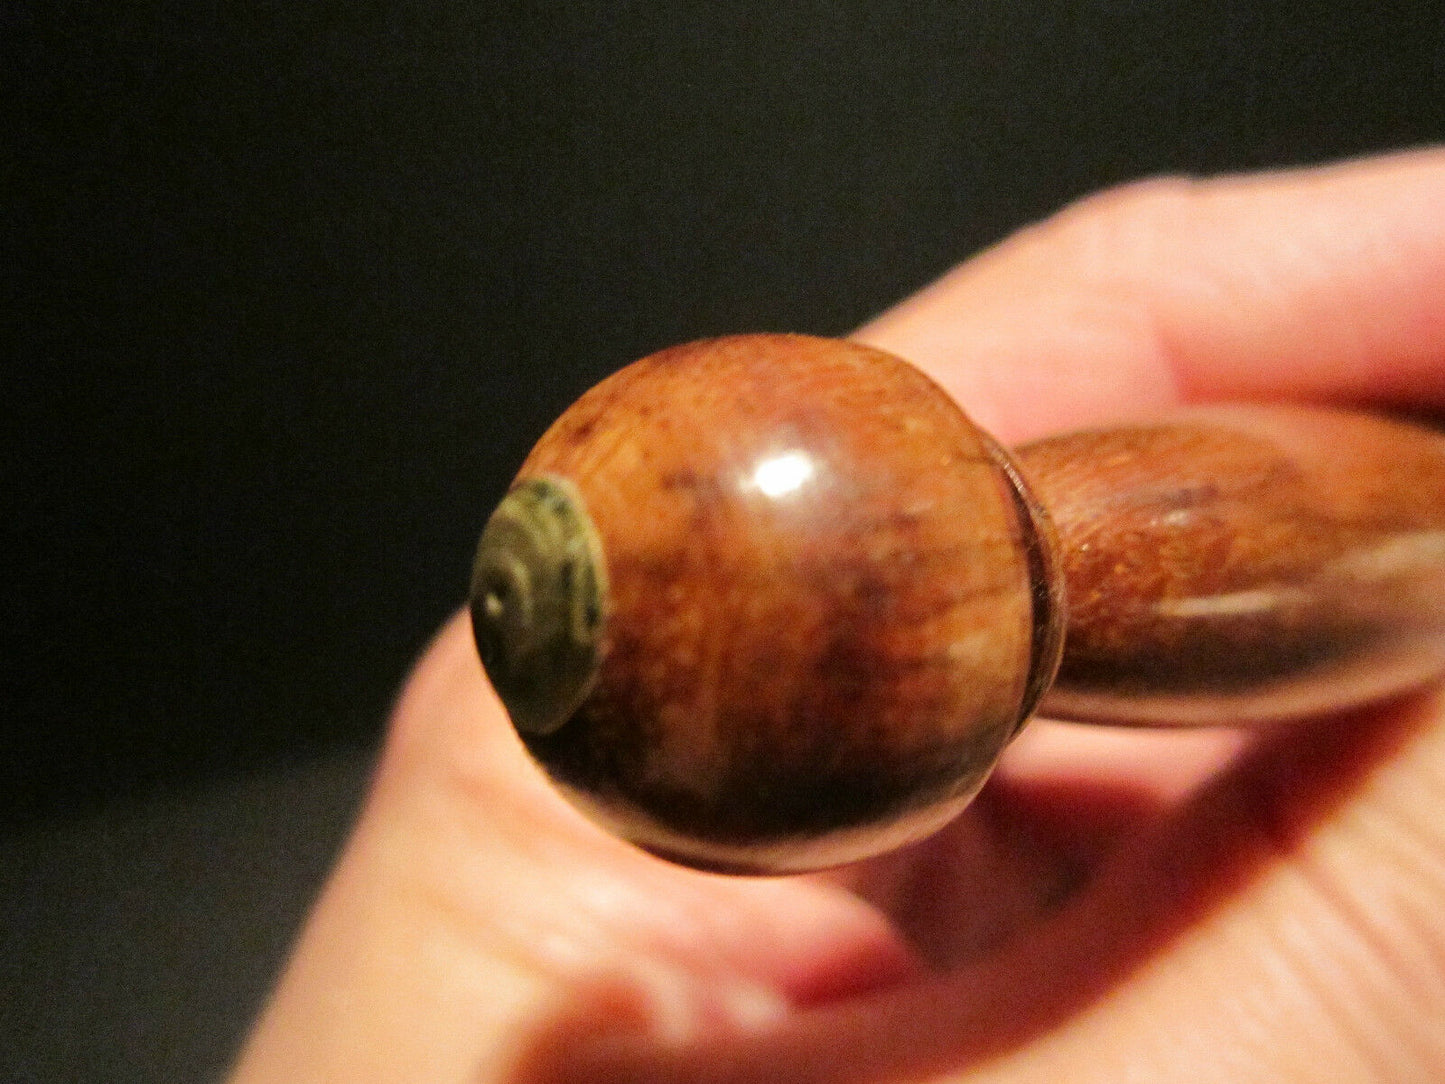 Vintage Antique Style Turned Wood Calligraphy Inkwell Dip Writing Pen - Early Home Decor